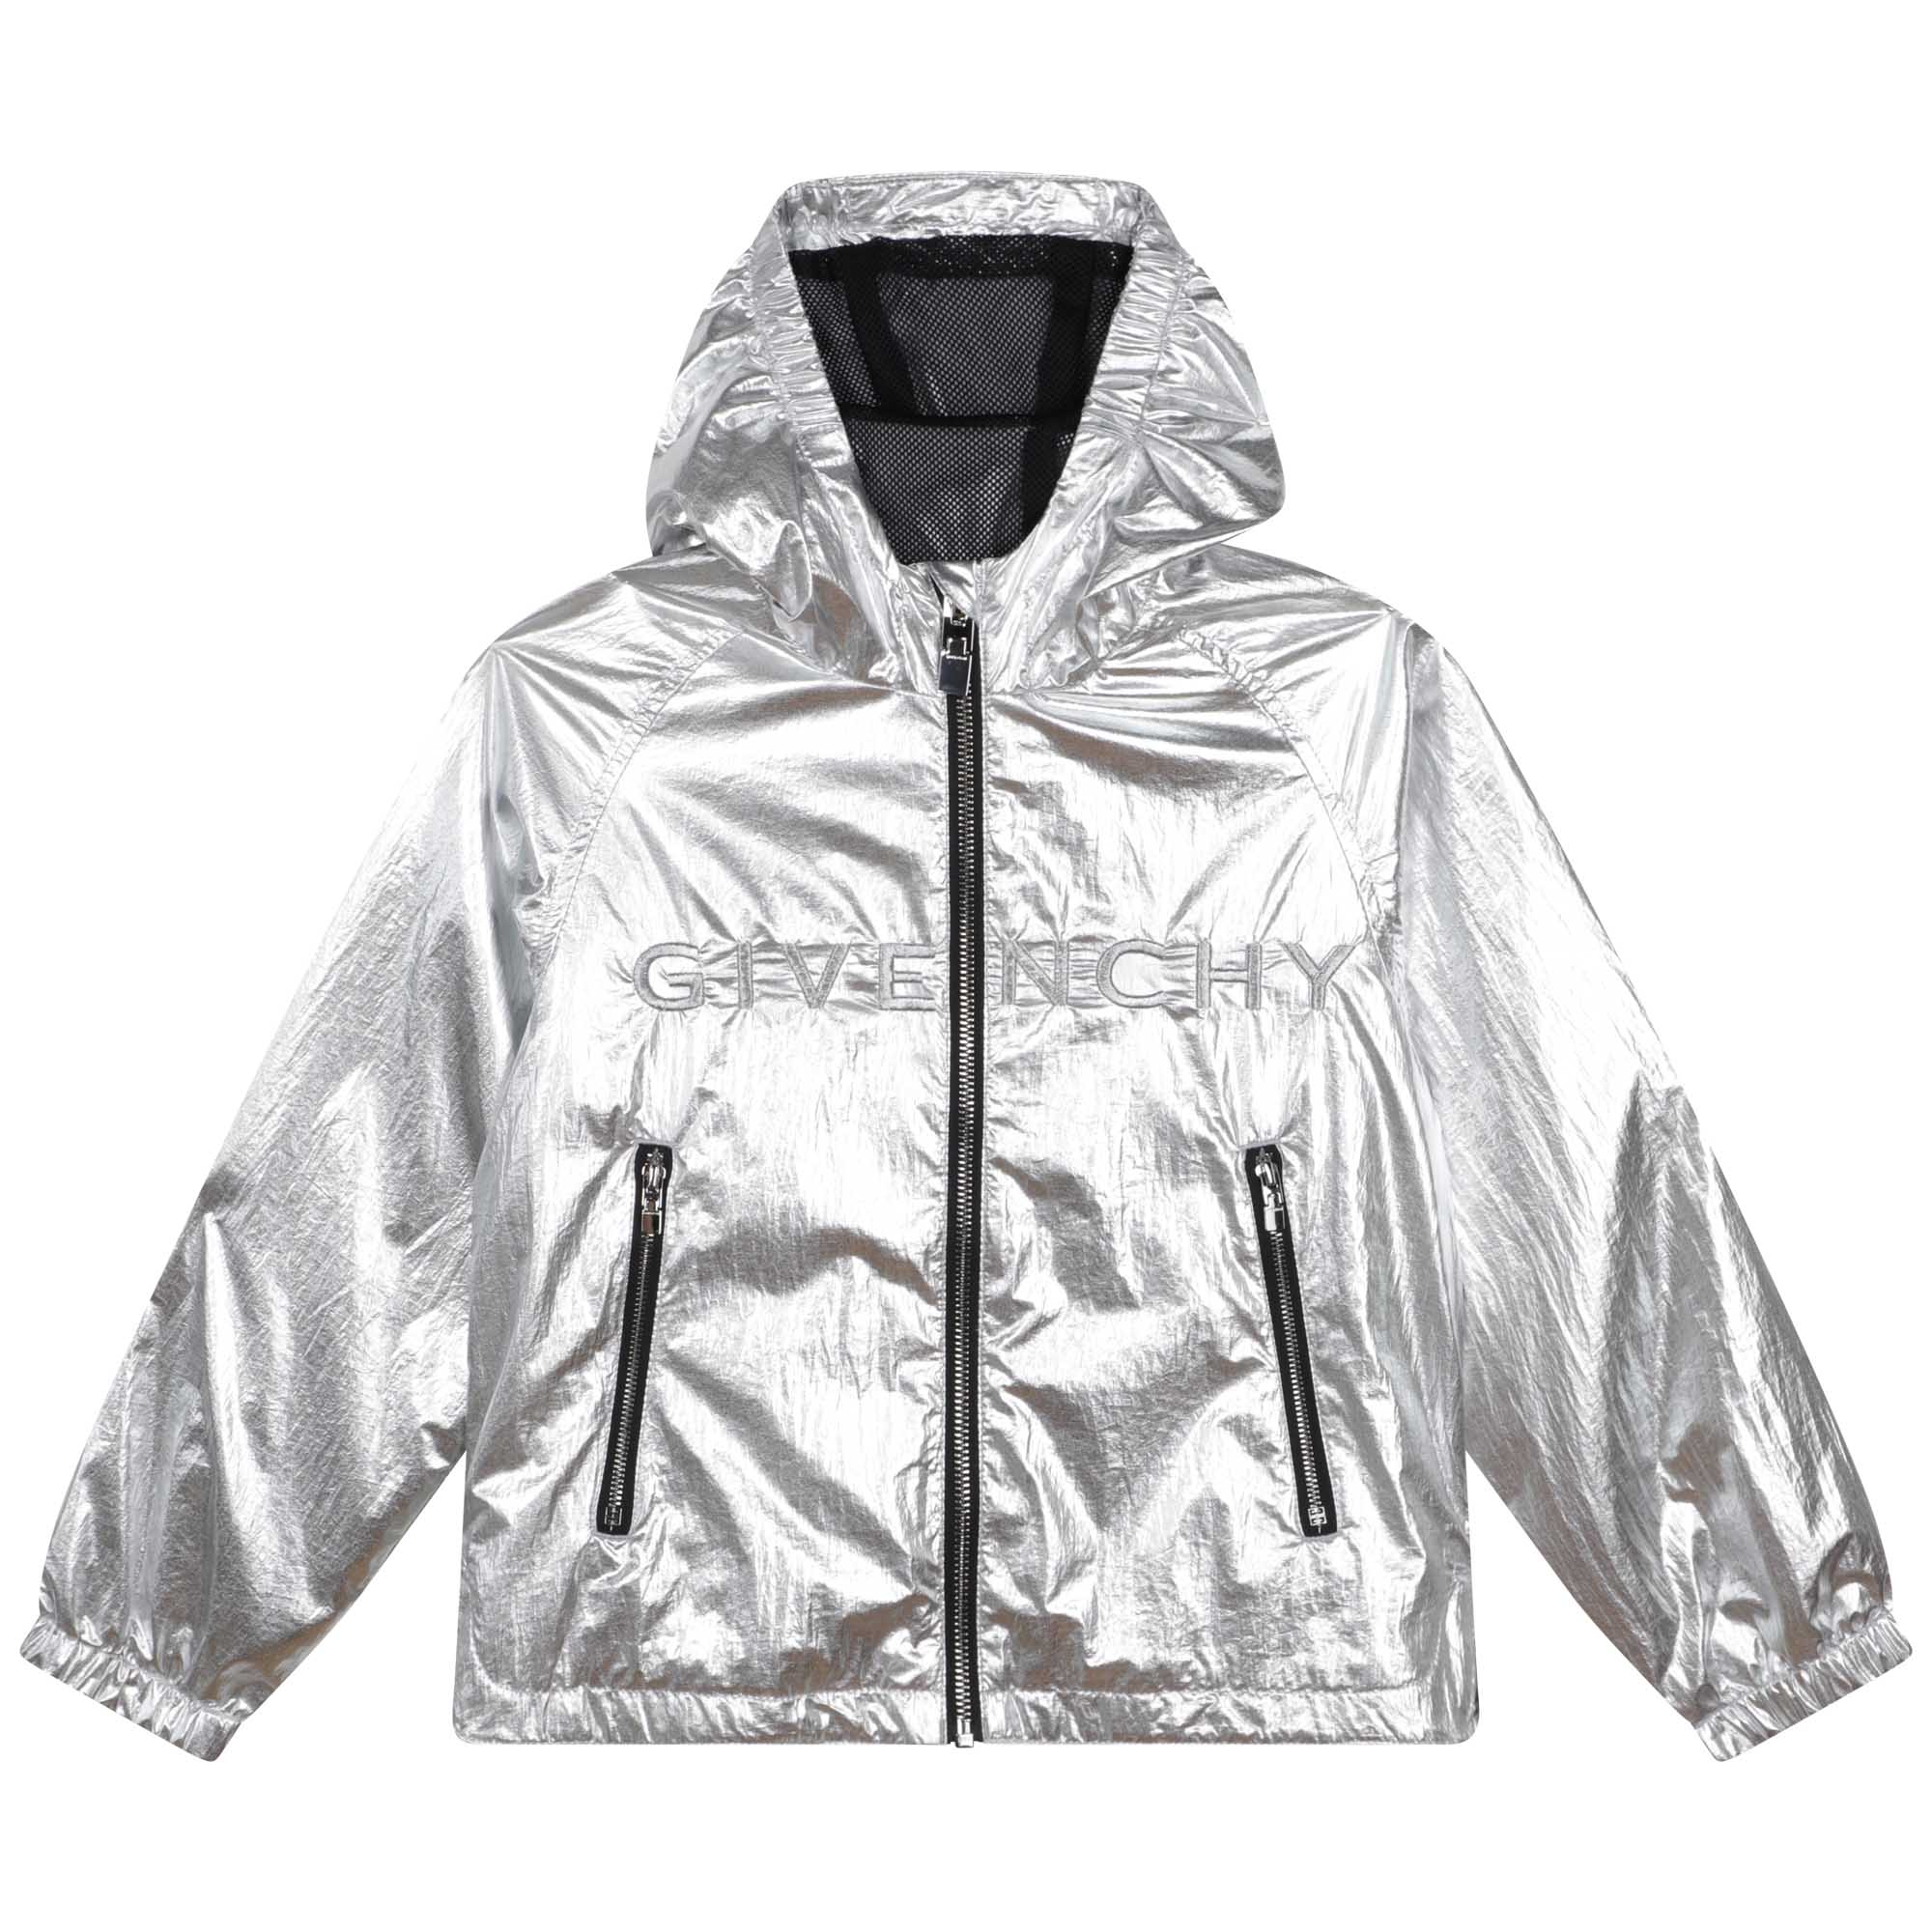 Hooded waterproof windcheater GIVENCHY for GIRL